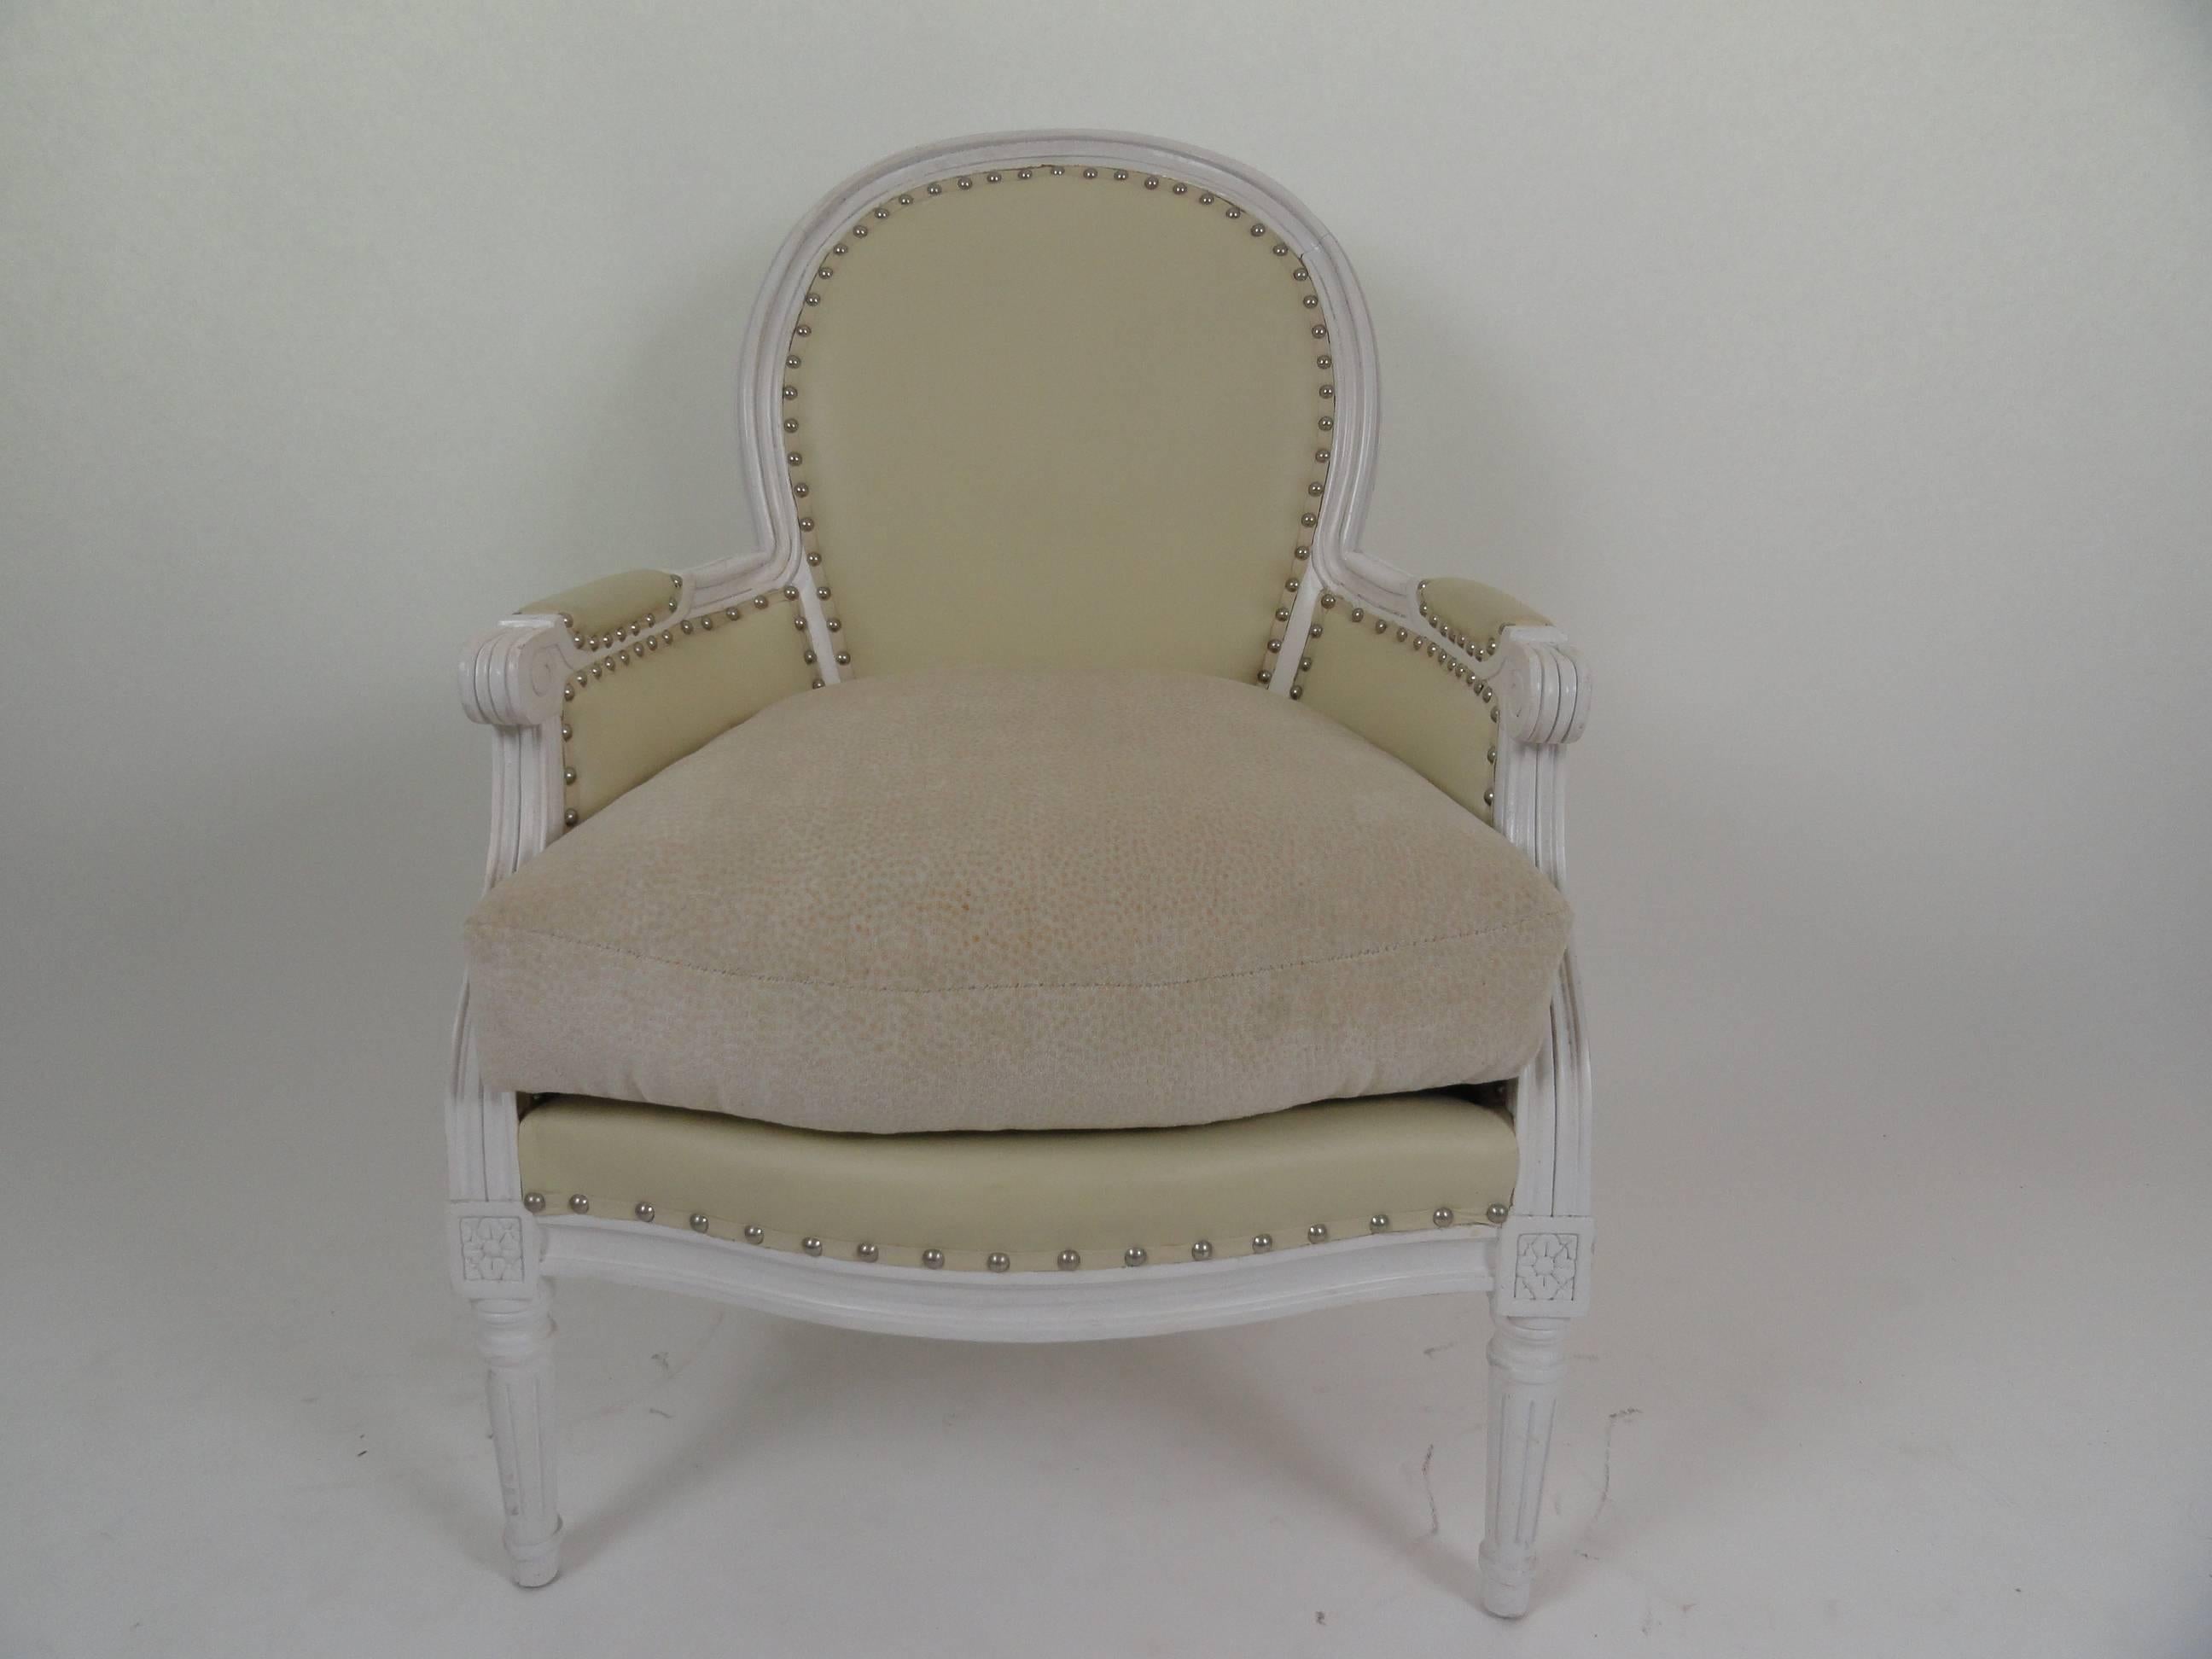 Louis XVI style bergere with white painted wood and nickel nailheads. Upholstered in leather. Seat cushion upholstered in cotton.